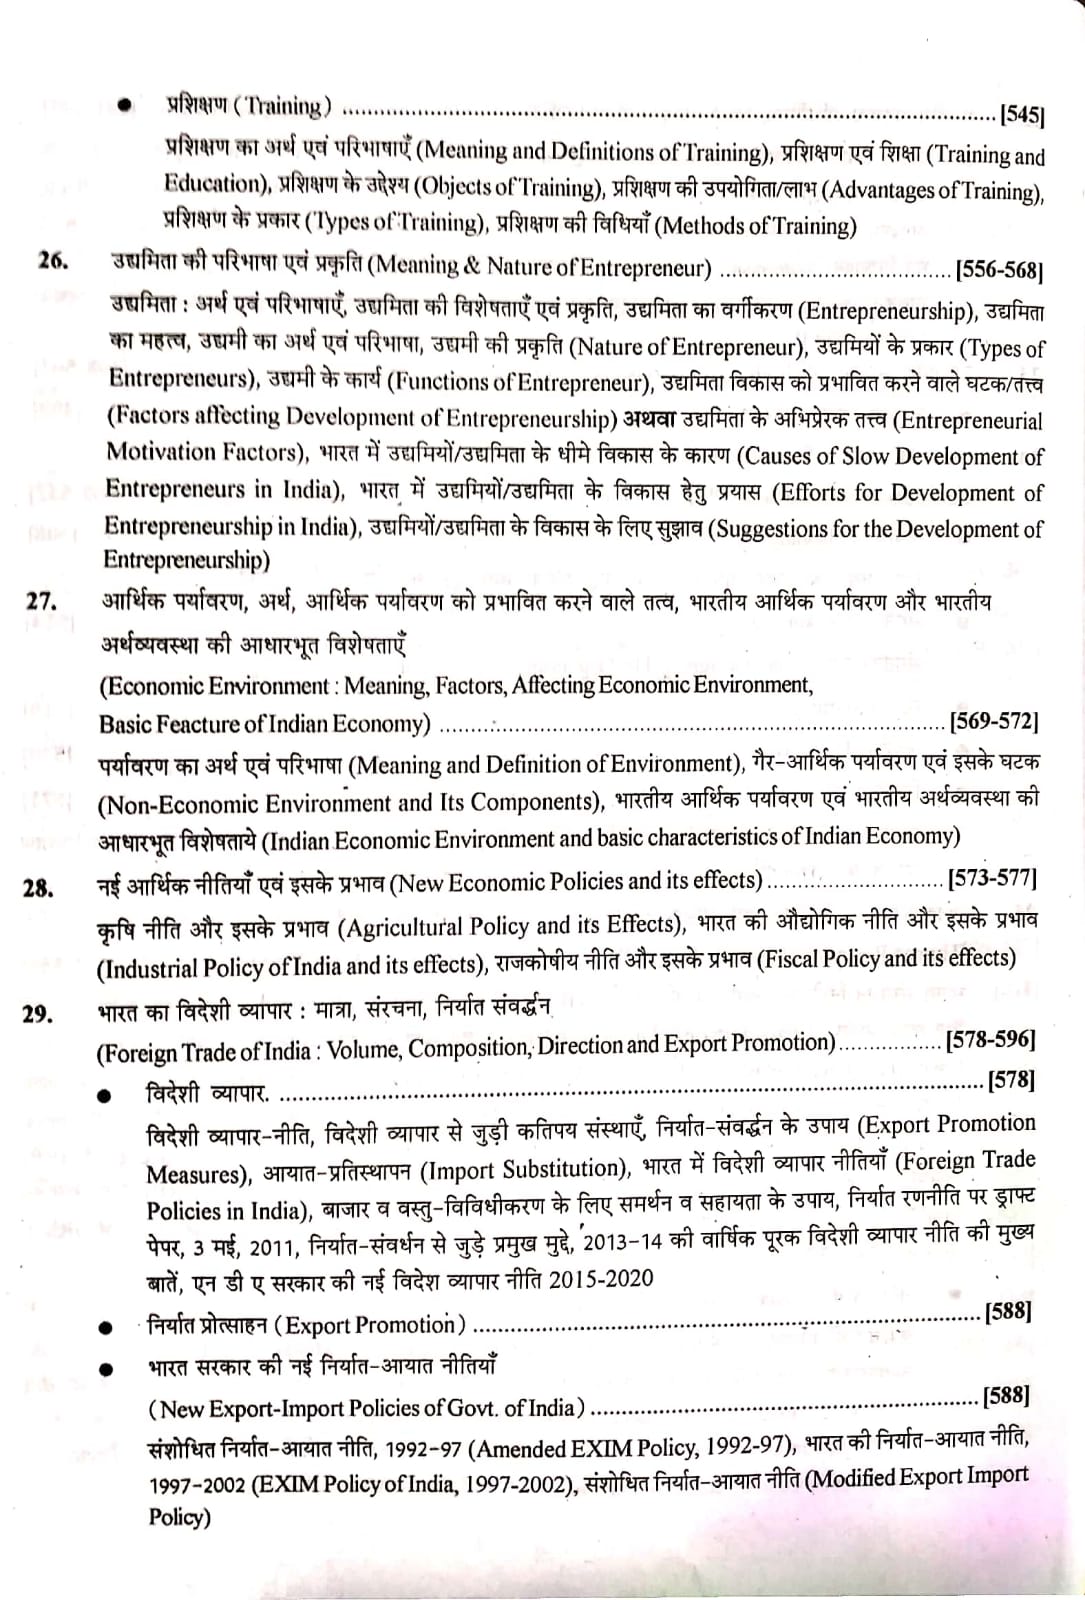 RBD First Grade Commerce (Vanijay) 2nd Paper By Manish Sir And Shivani Bhojak For RPSC 1st Grade School Lecturer Examination Latest Edition (Free Shipping)